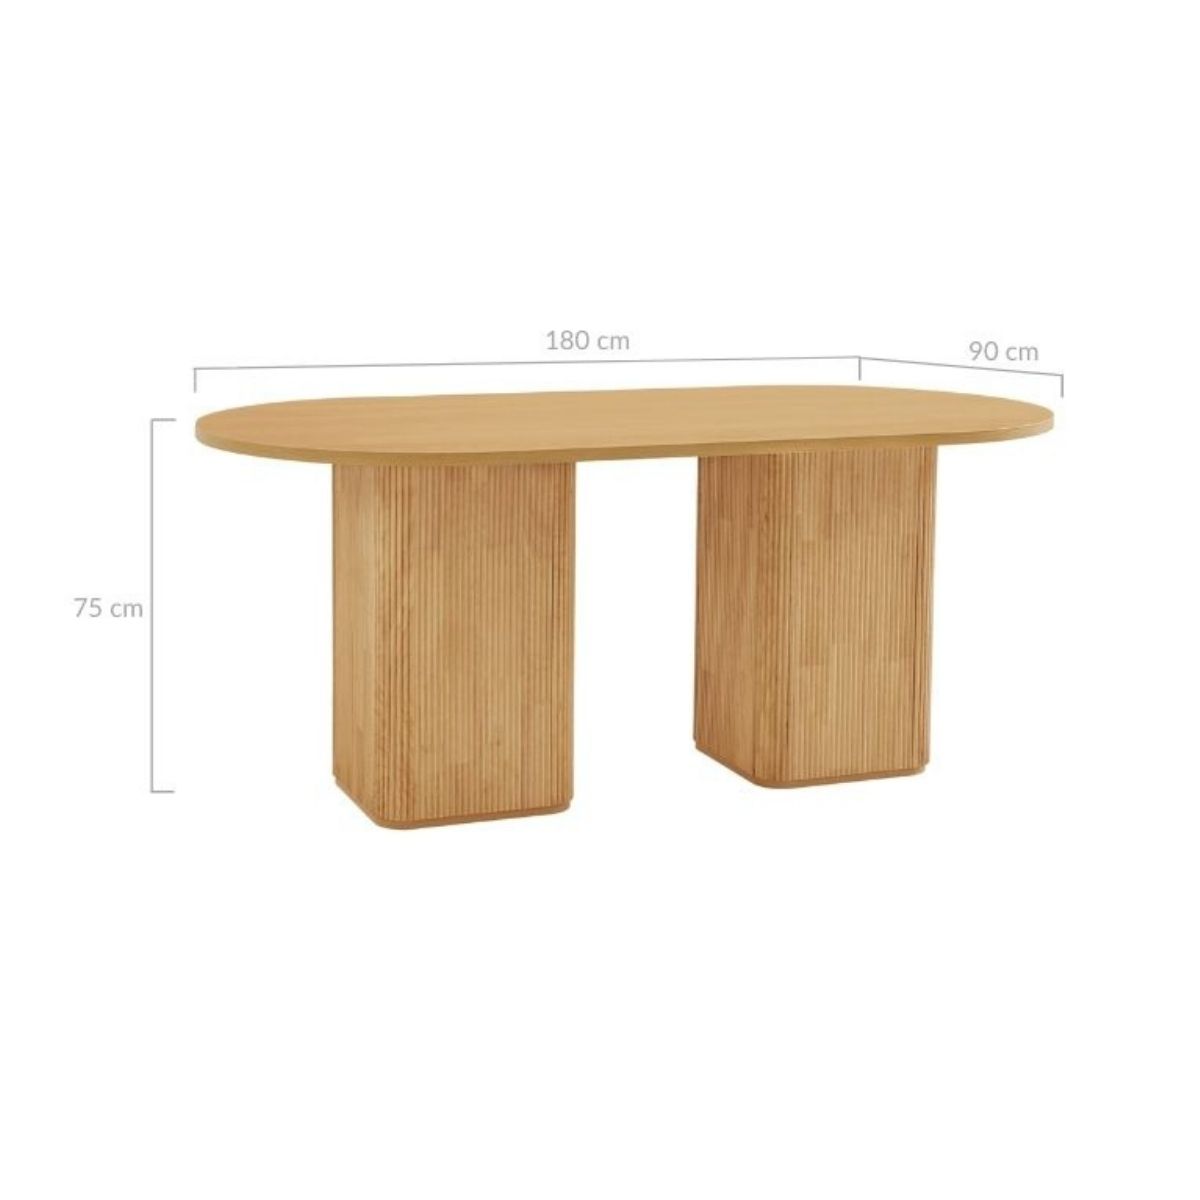 Tate 6 Seater Column Dining Table in Natural